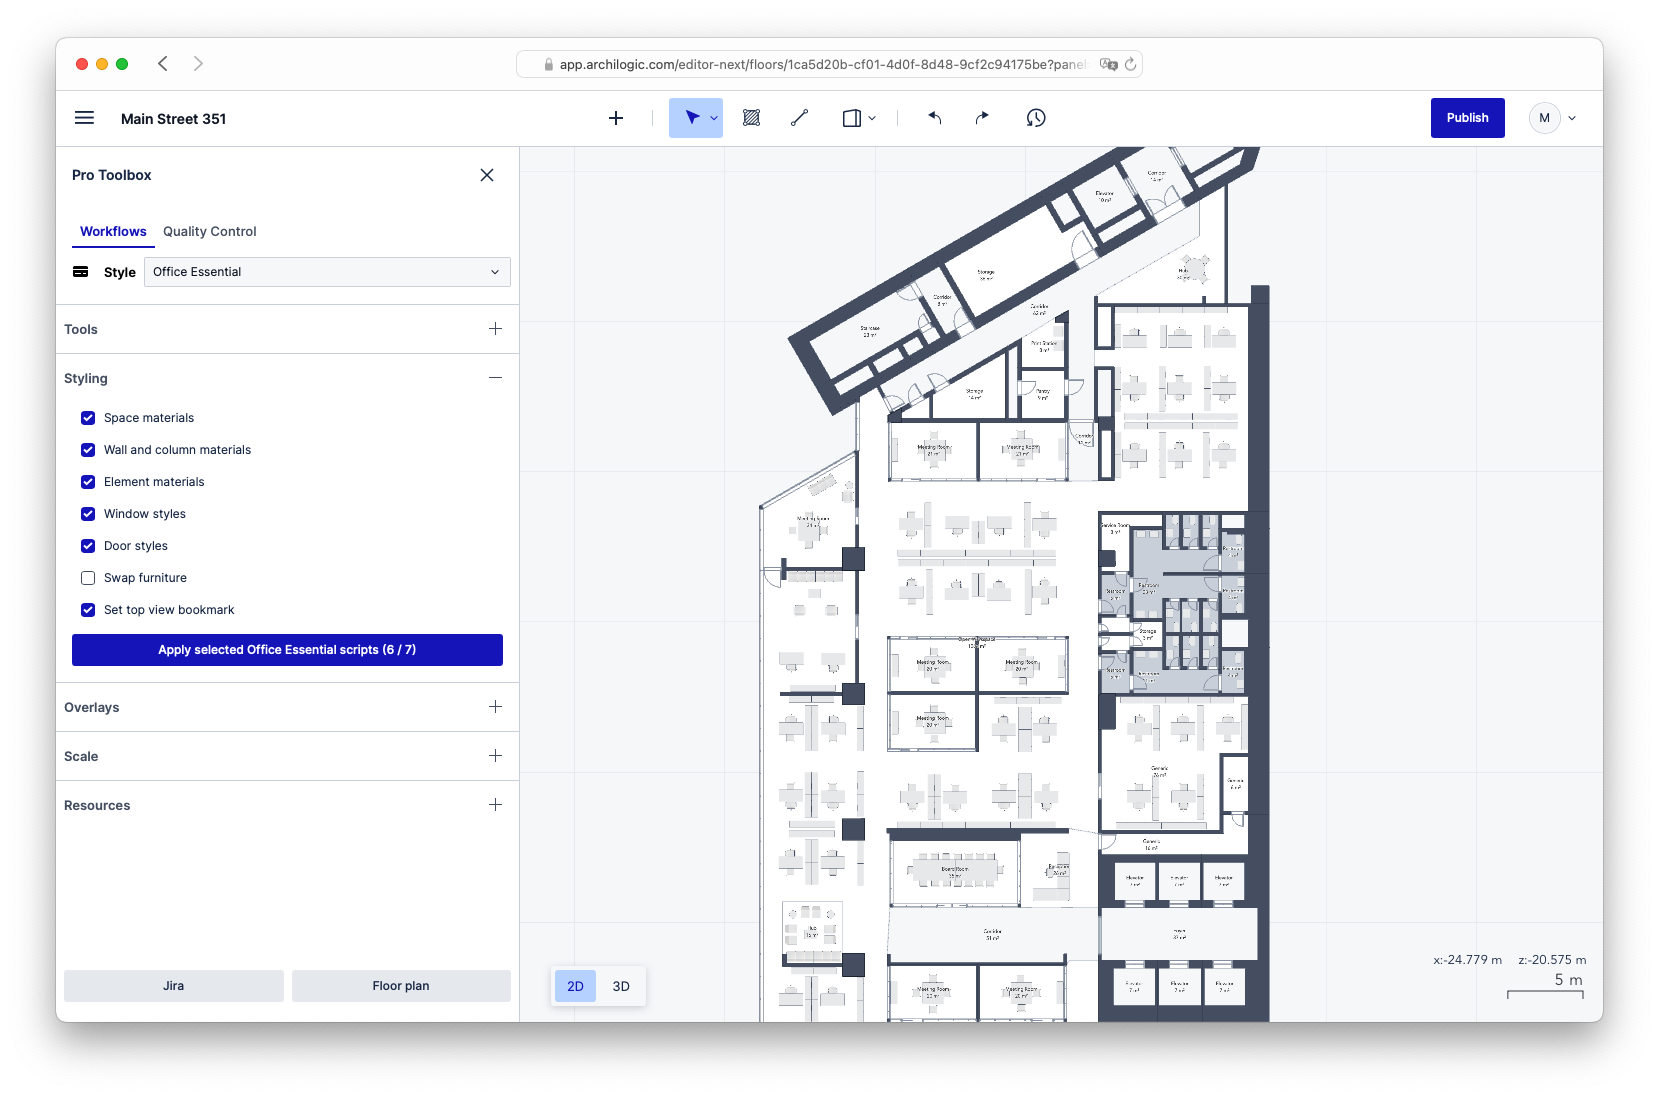 Workflows plugin: the floor plan conversion team uses this plugin to enforce a given style, e.g. wall heights, wall materials, types of furniture, etc.